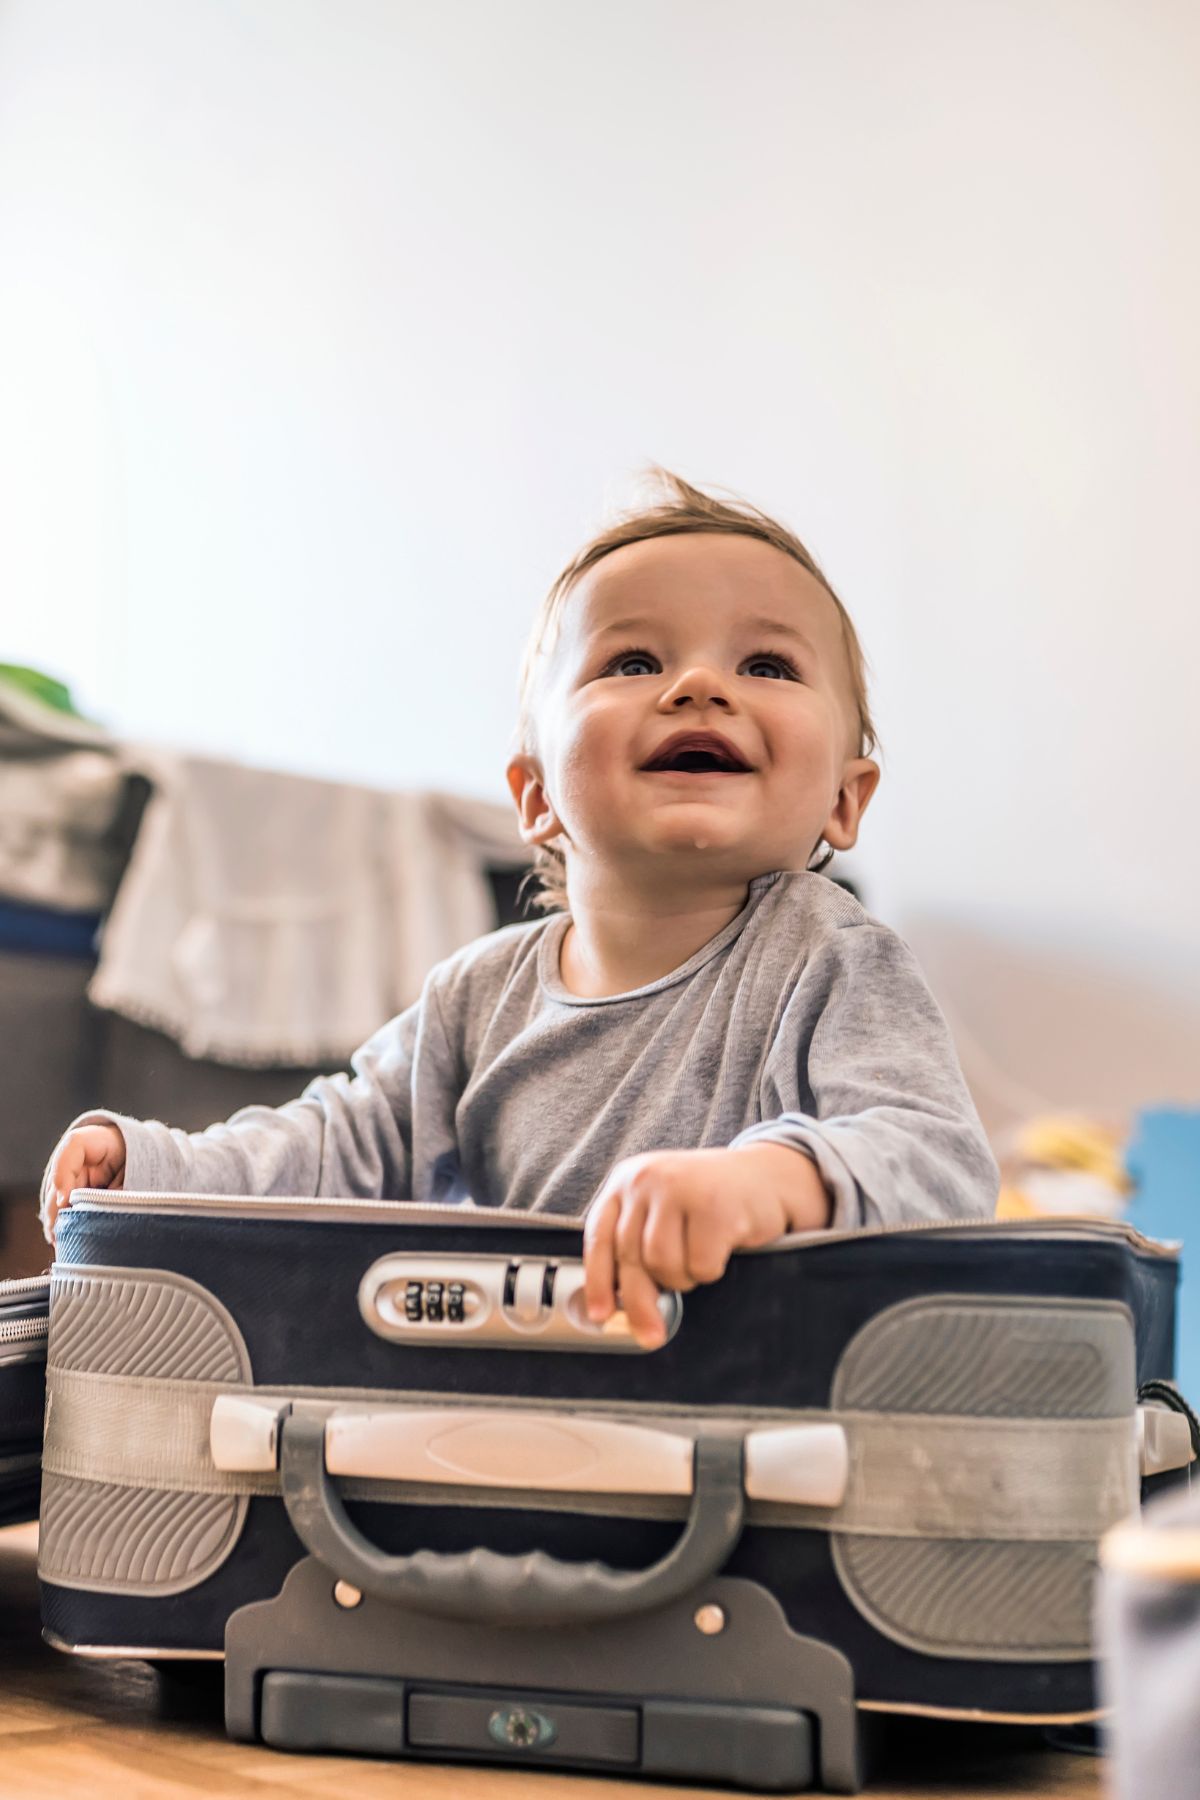 A smiling baby boy sits in an unpacked suitcase in a living room.